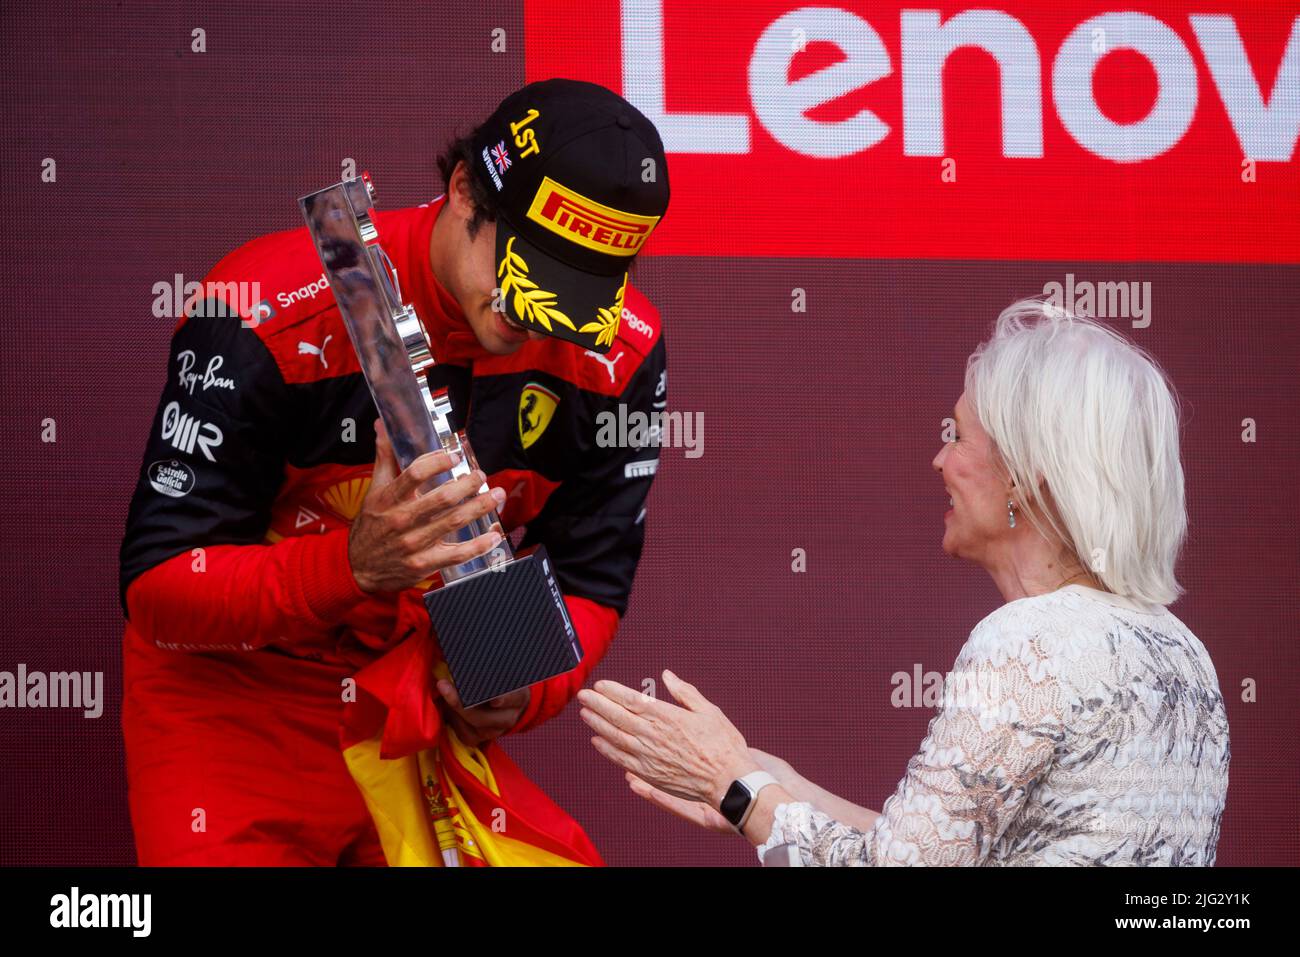 Carlos Sainz celebrates winning his first ever F1 Grand Prix as Nadine Dorries hands him the trophy on the podium at the F1 British Grand Prix. Carlos Stock Photo